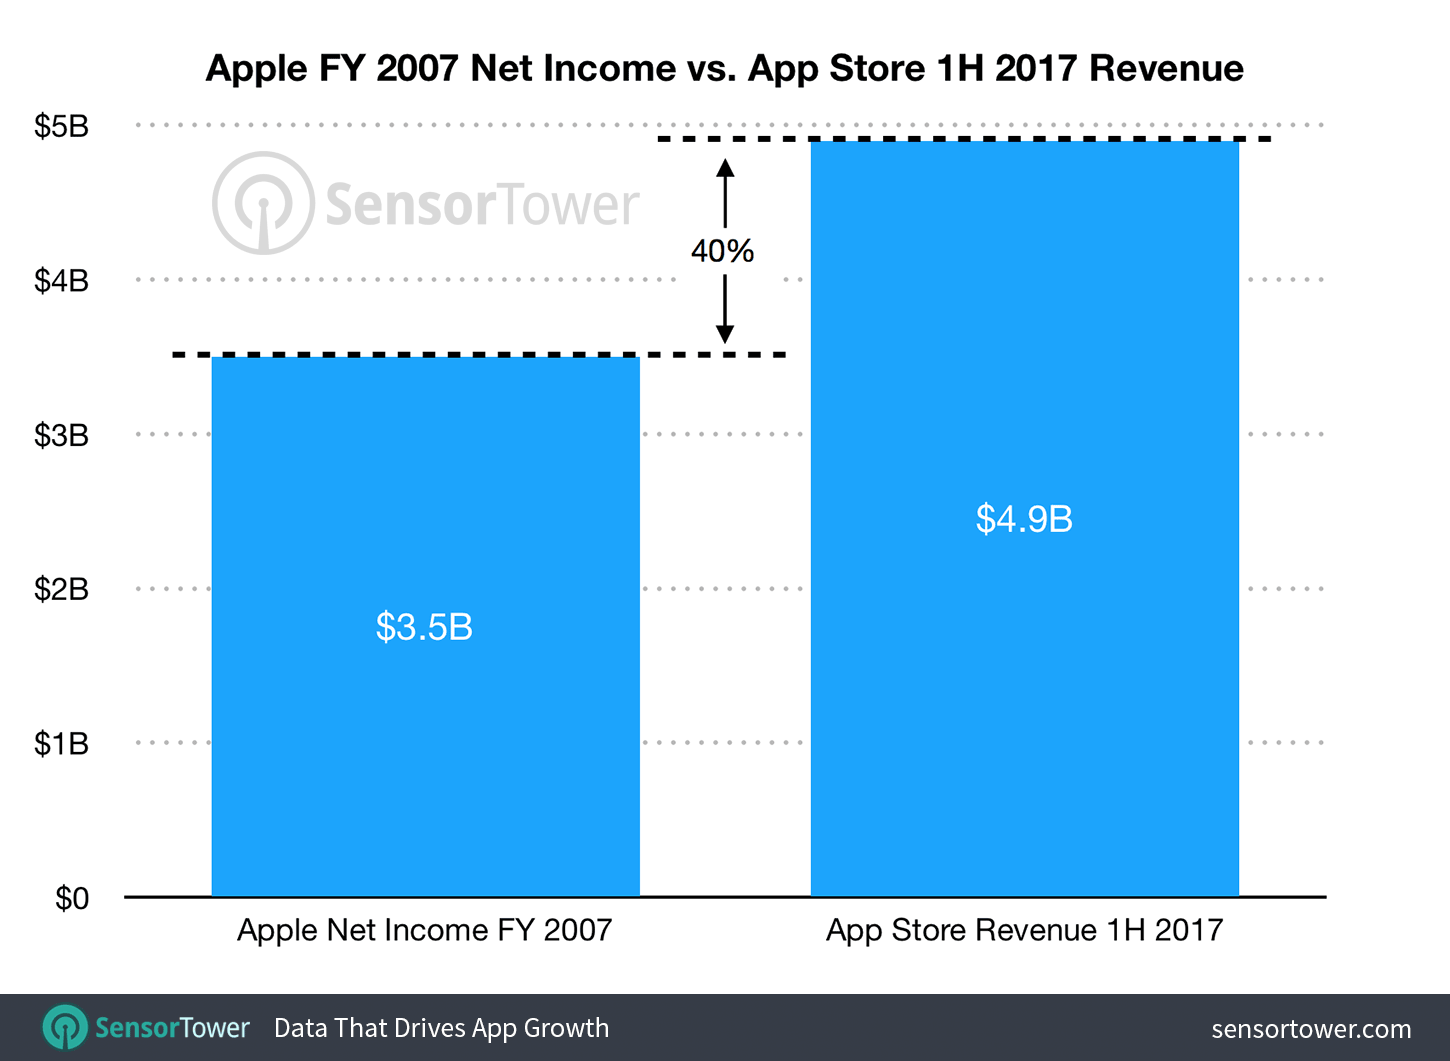 Apple's net revenue from in-app purchases for the first half of 2017 as compared to its net revenue for fiscal year 2007